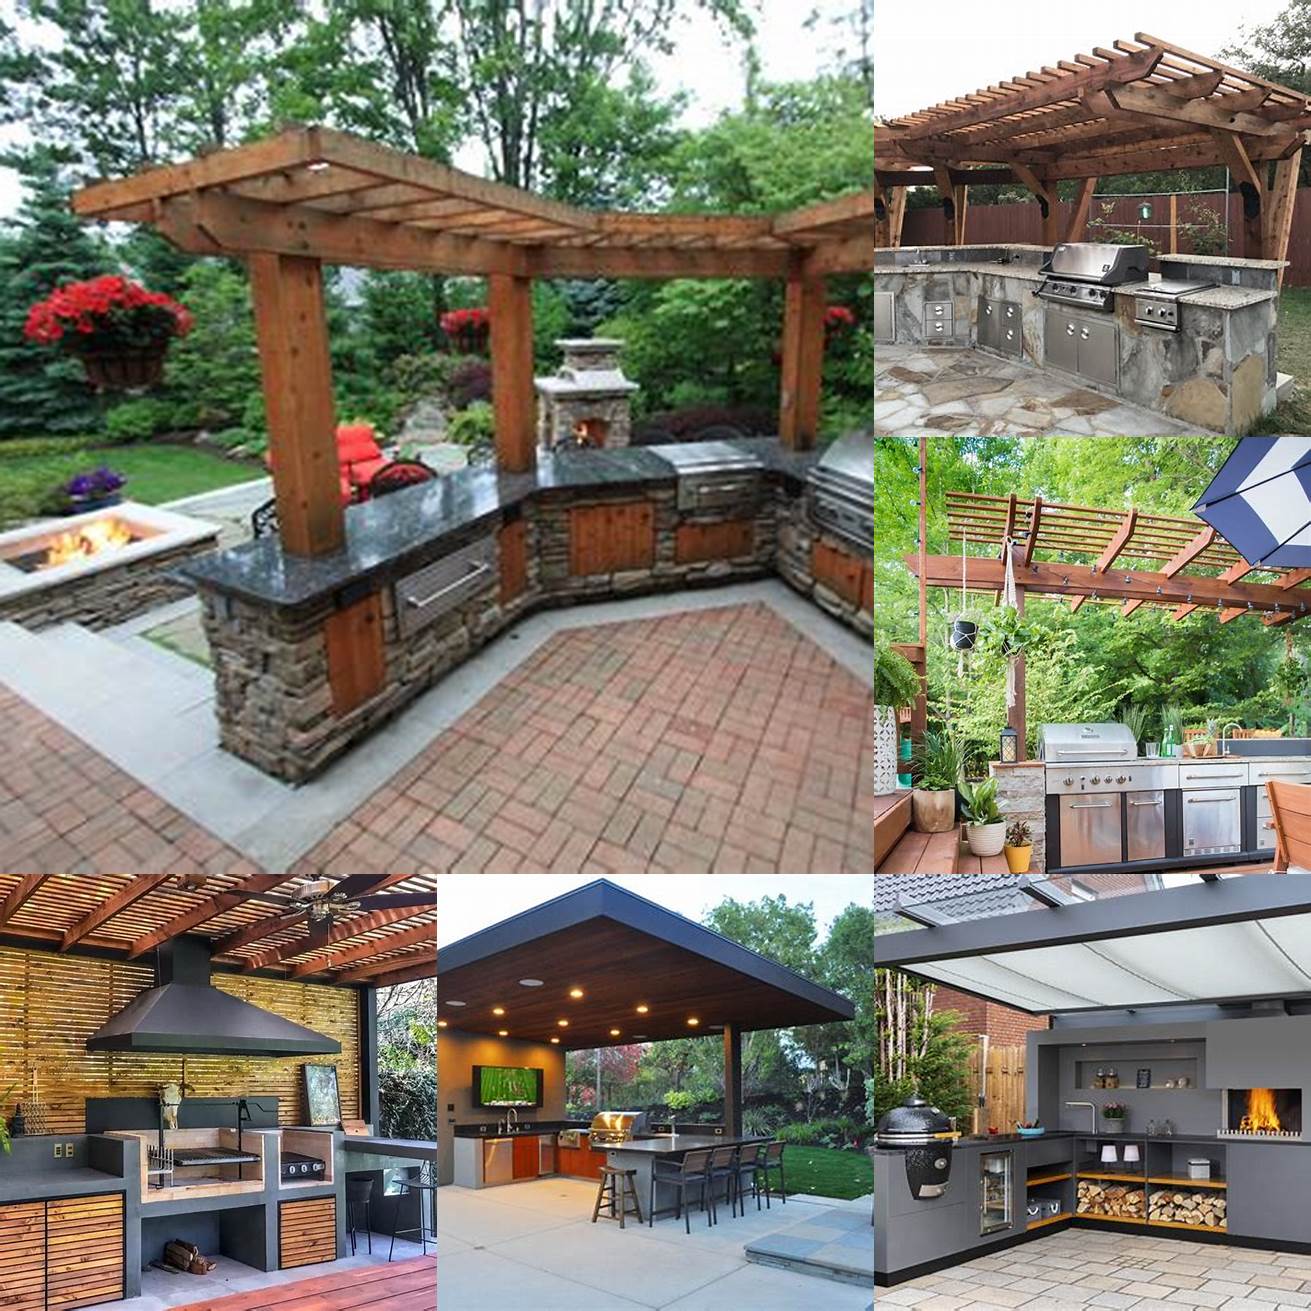 4 Outdoor kitchen with a pergola